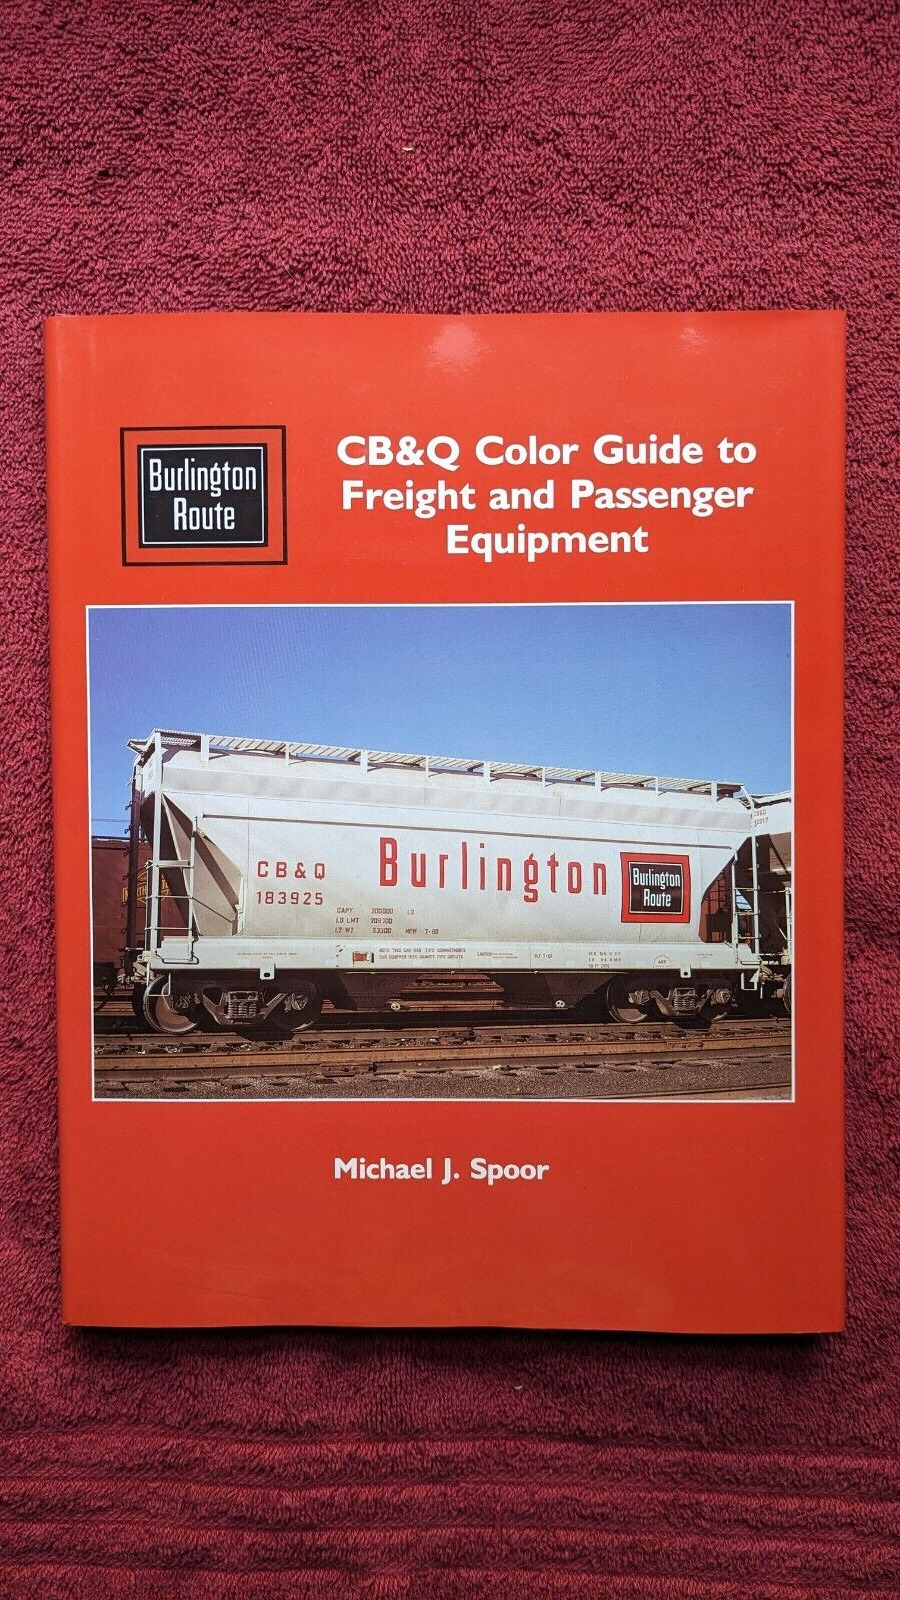 CB&Q Color Guide to Freight and Passenger Equipment MDV